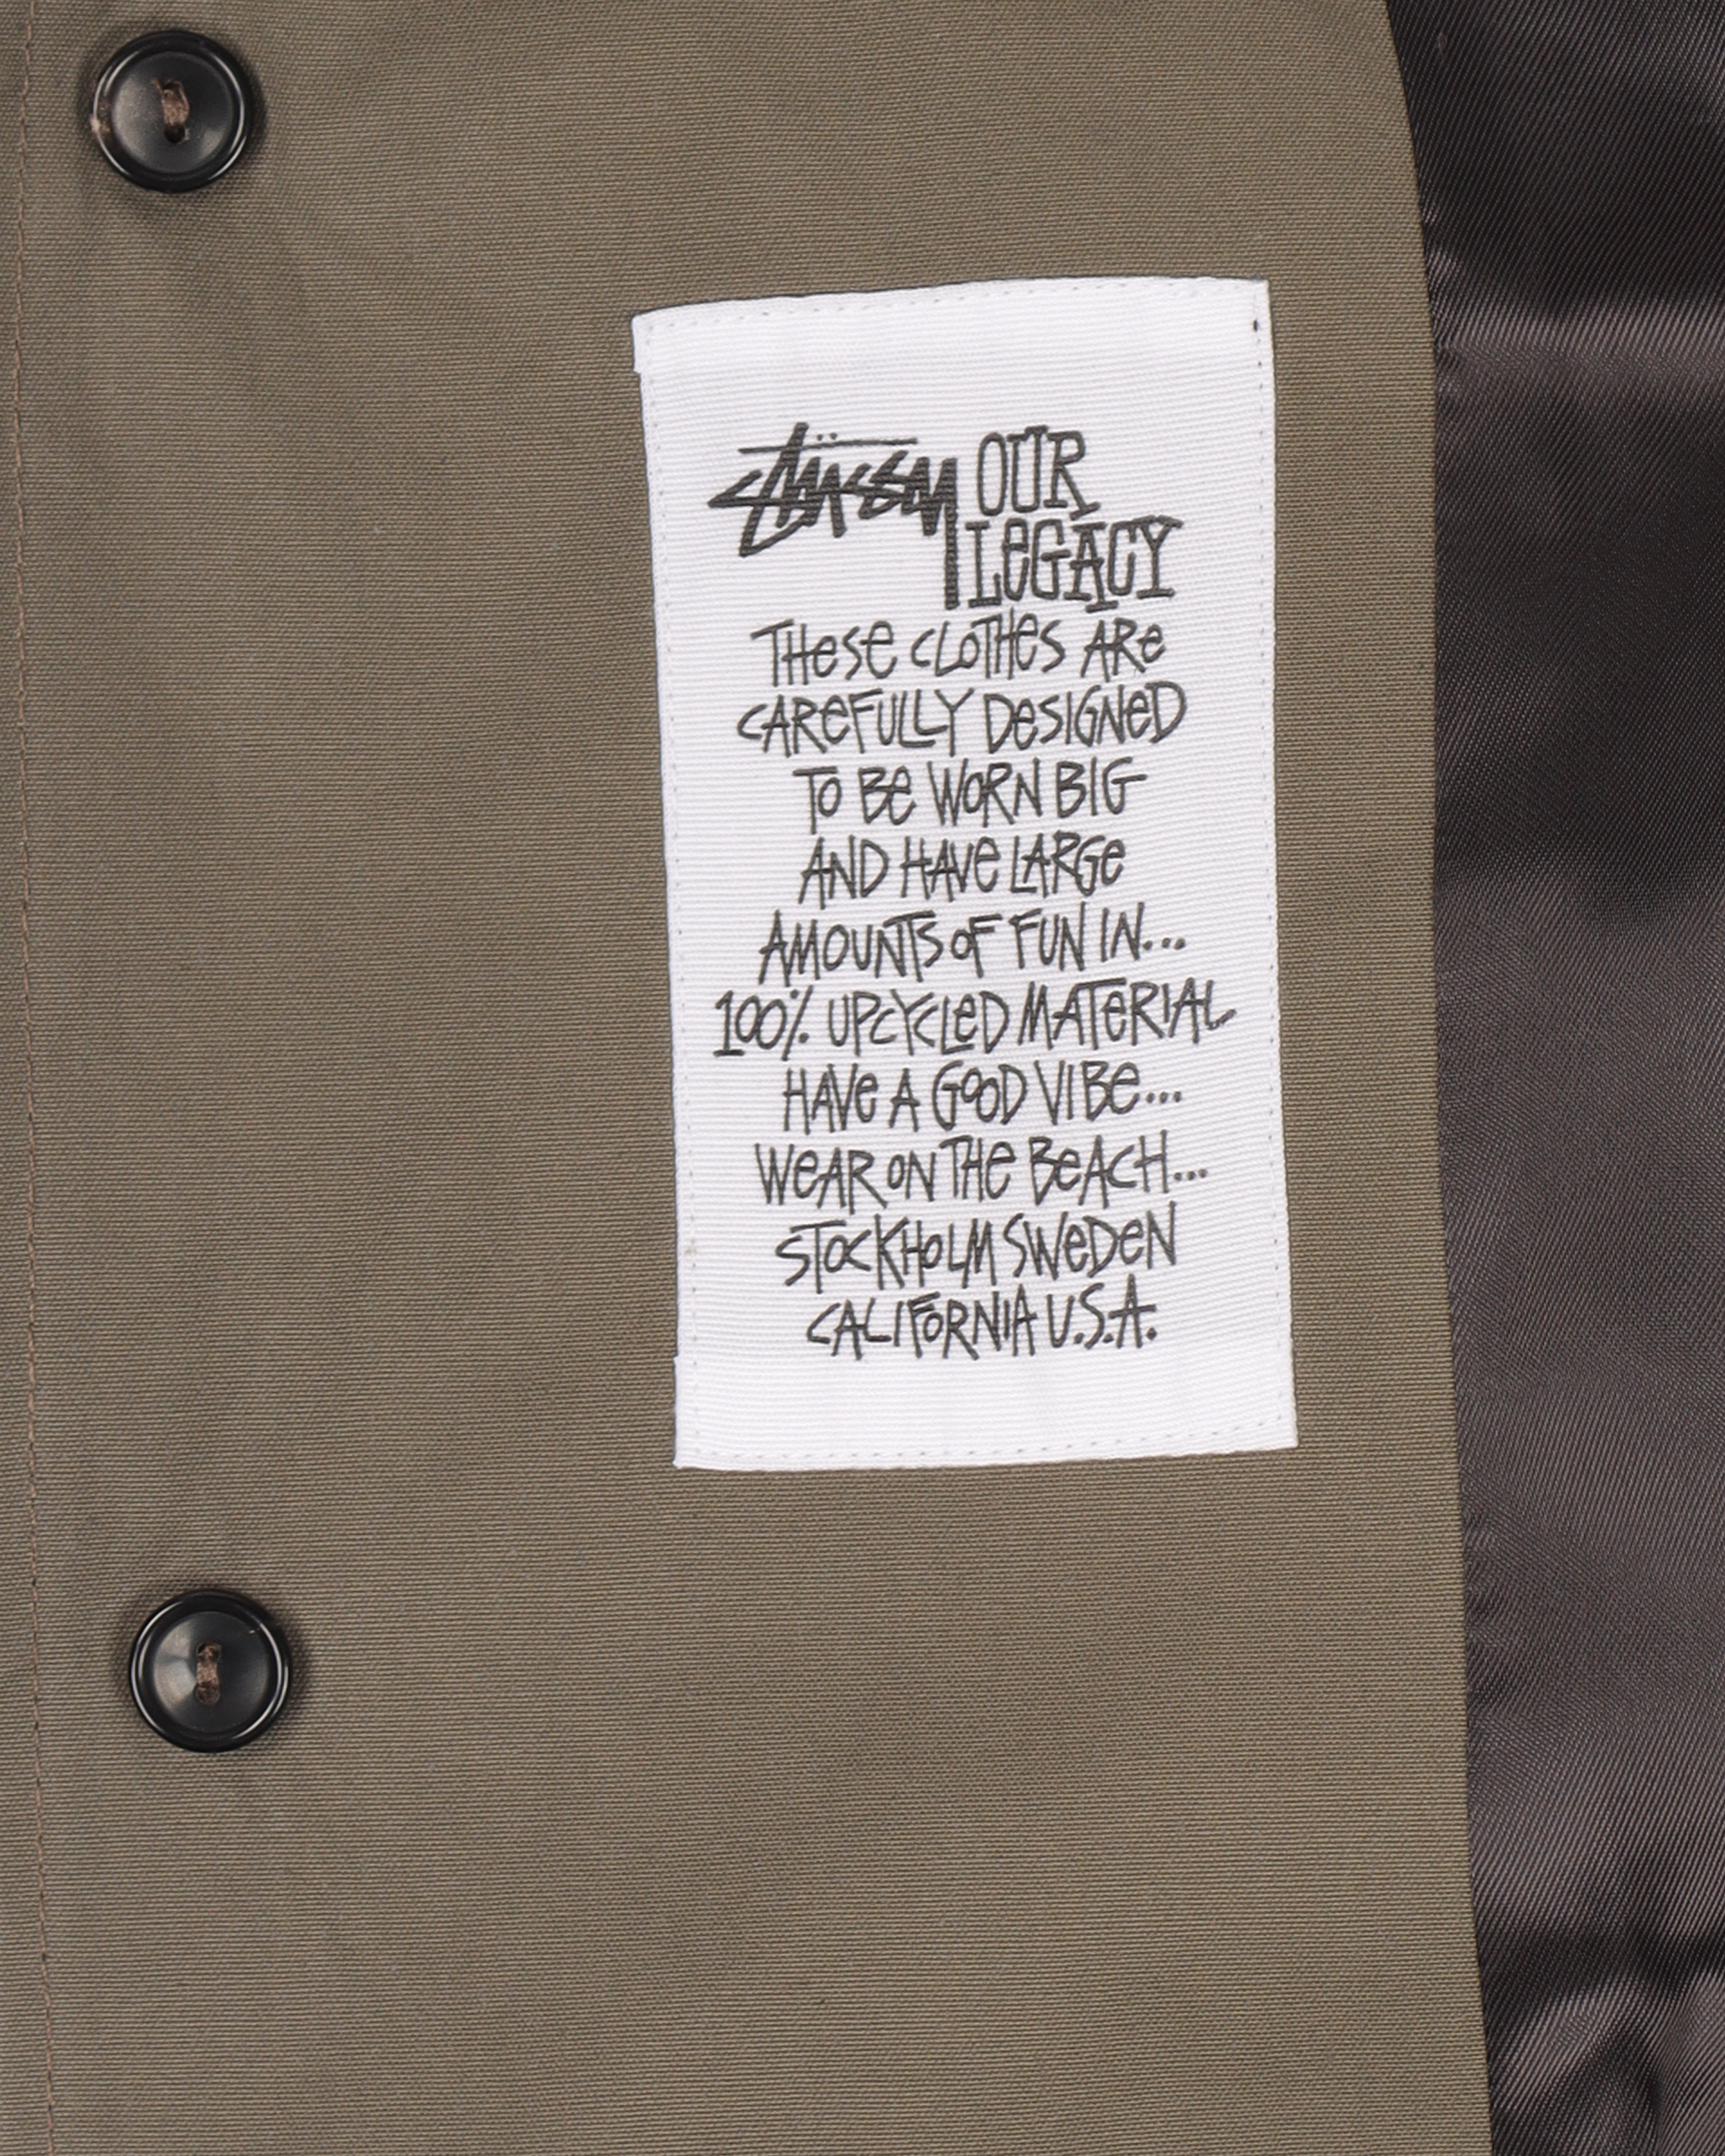 Our Legacy Trench Coat